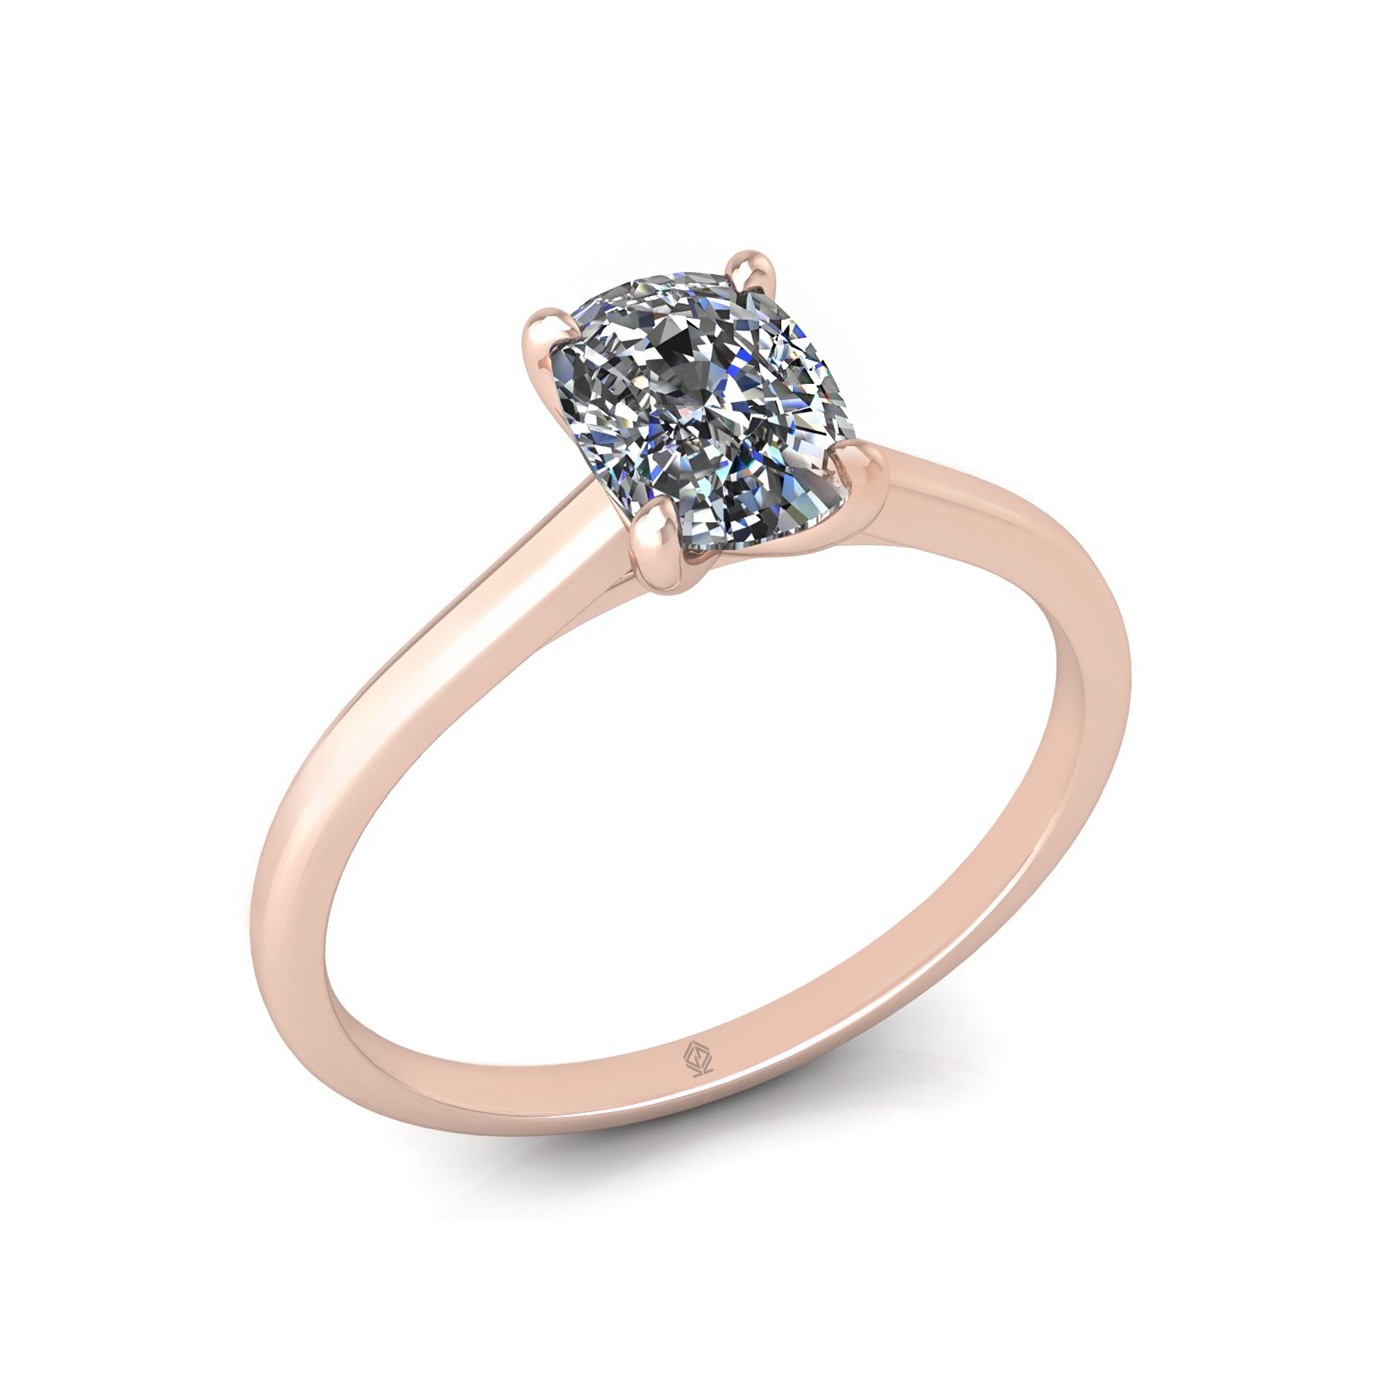 18k rose gold 1,20 ct 4 prongs solitaire elongated cushion cut diamond engagement ring with whisper thin band